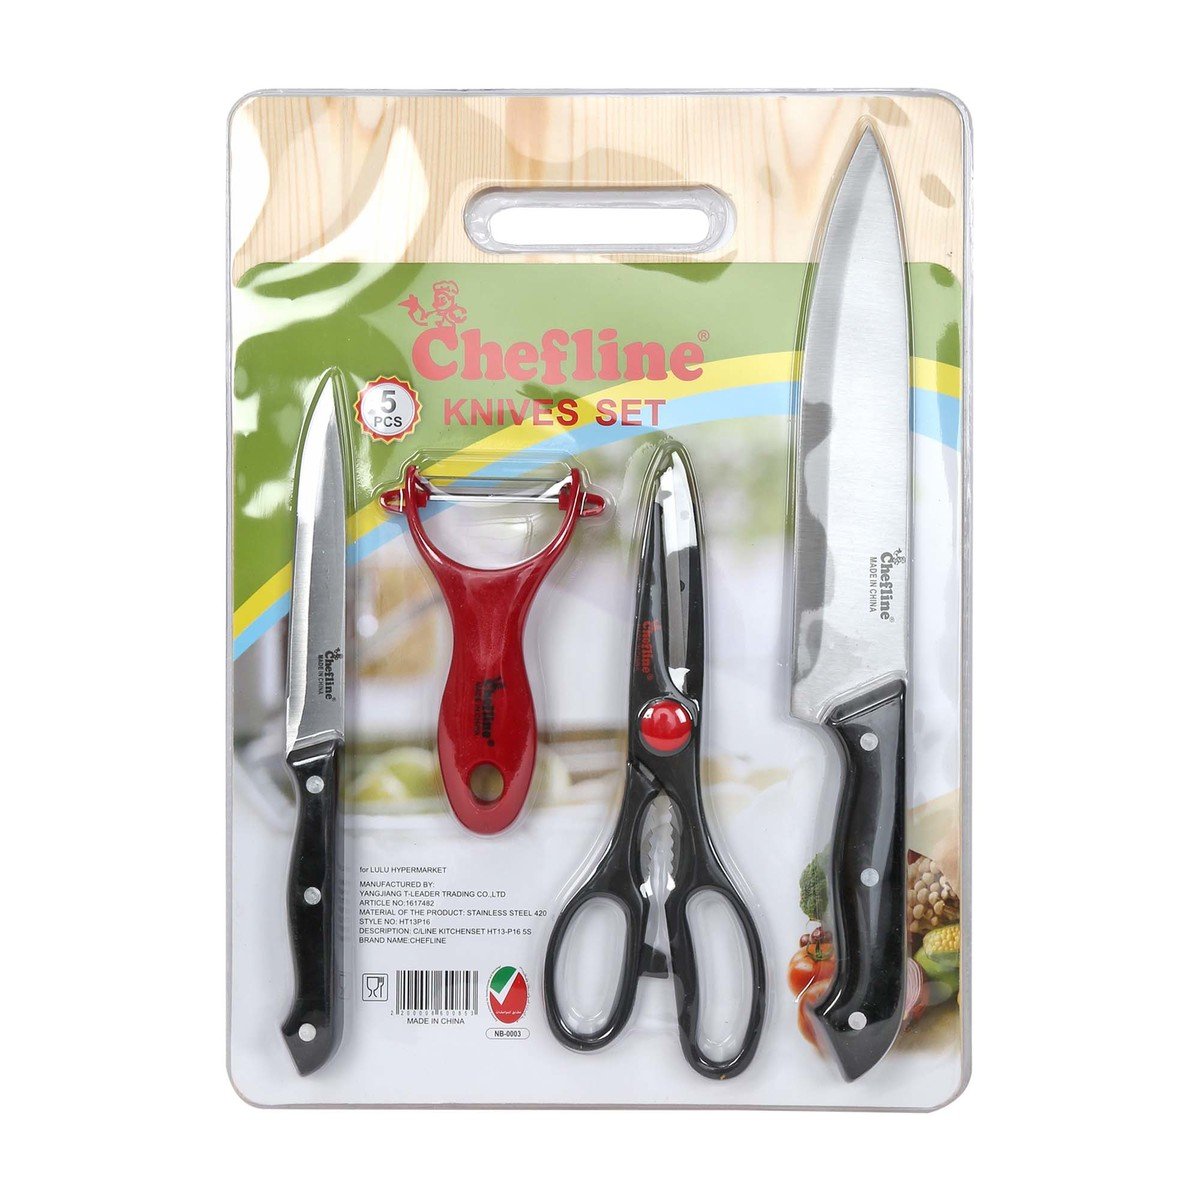 Chefline Kitchen Tool Set with Cutting Board HT13-P16 5pcs